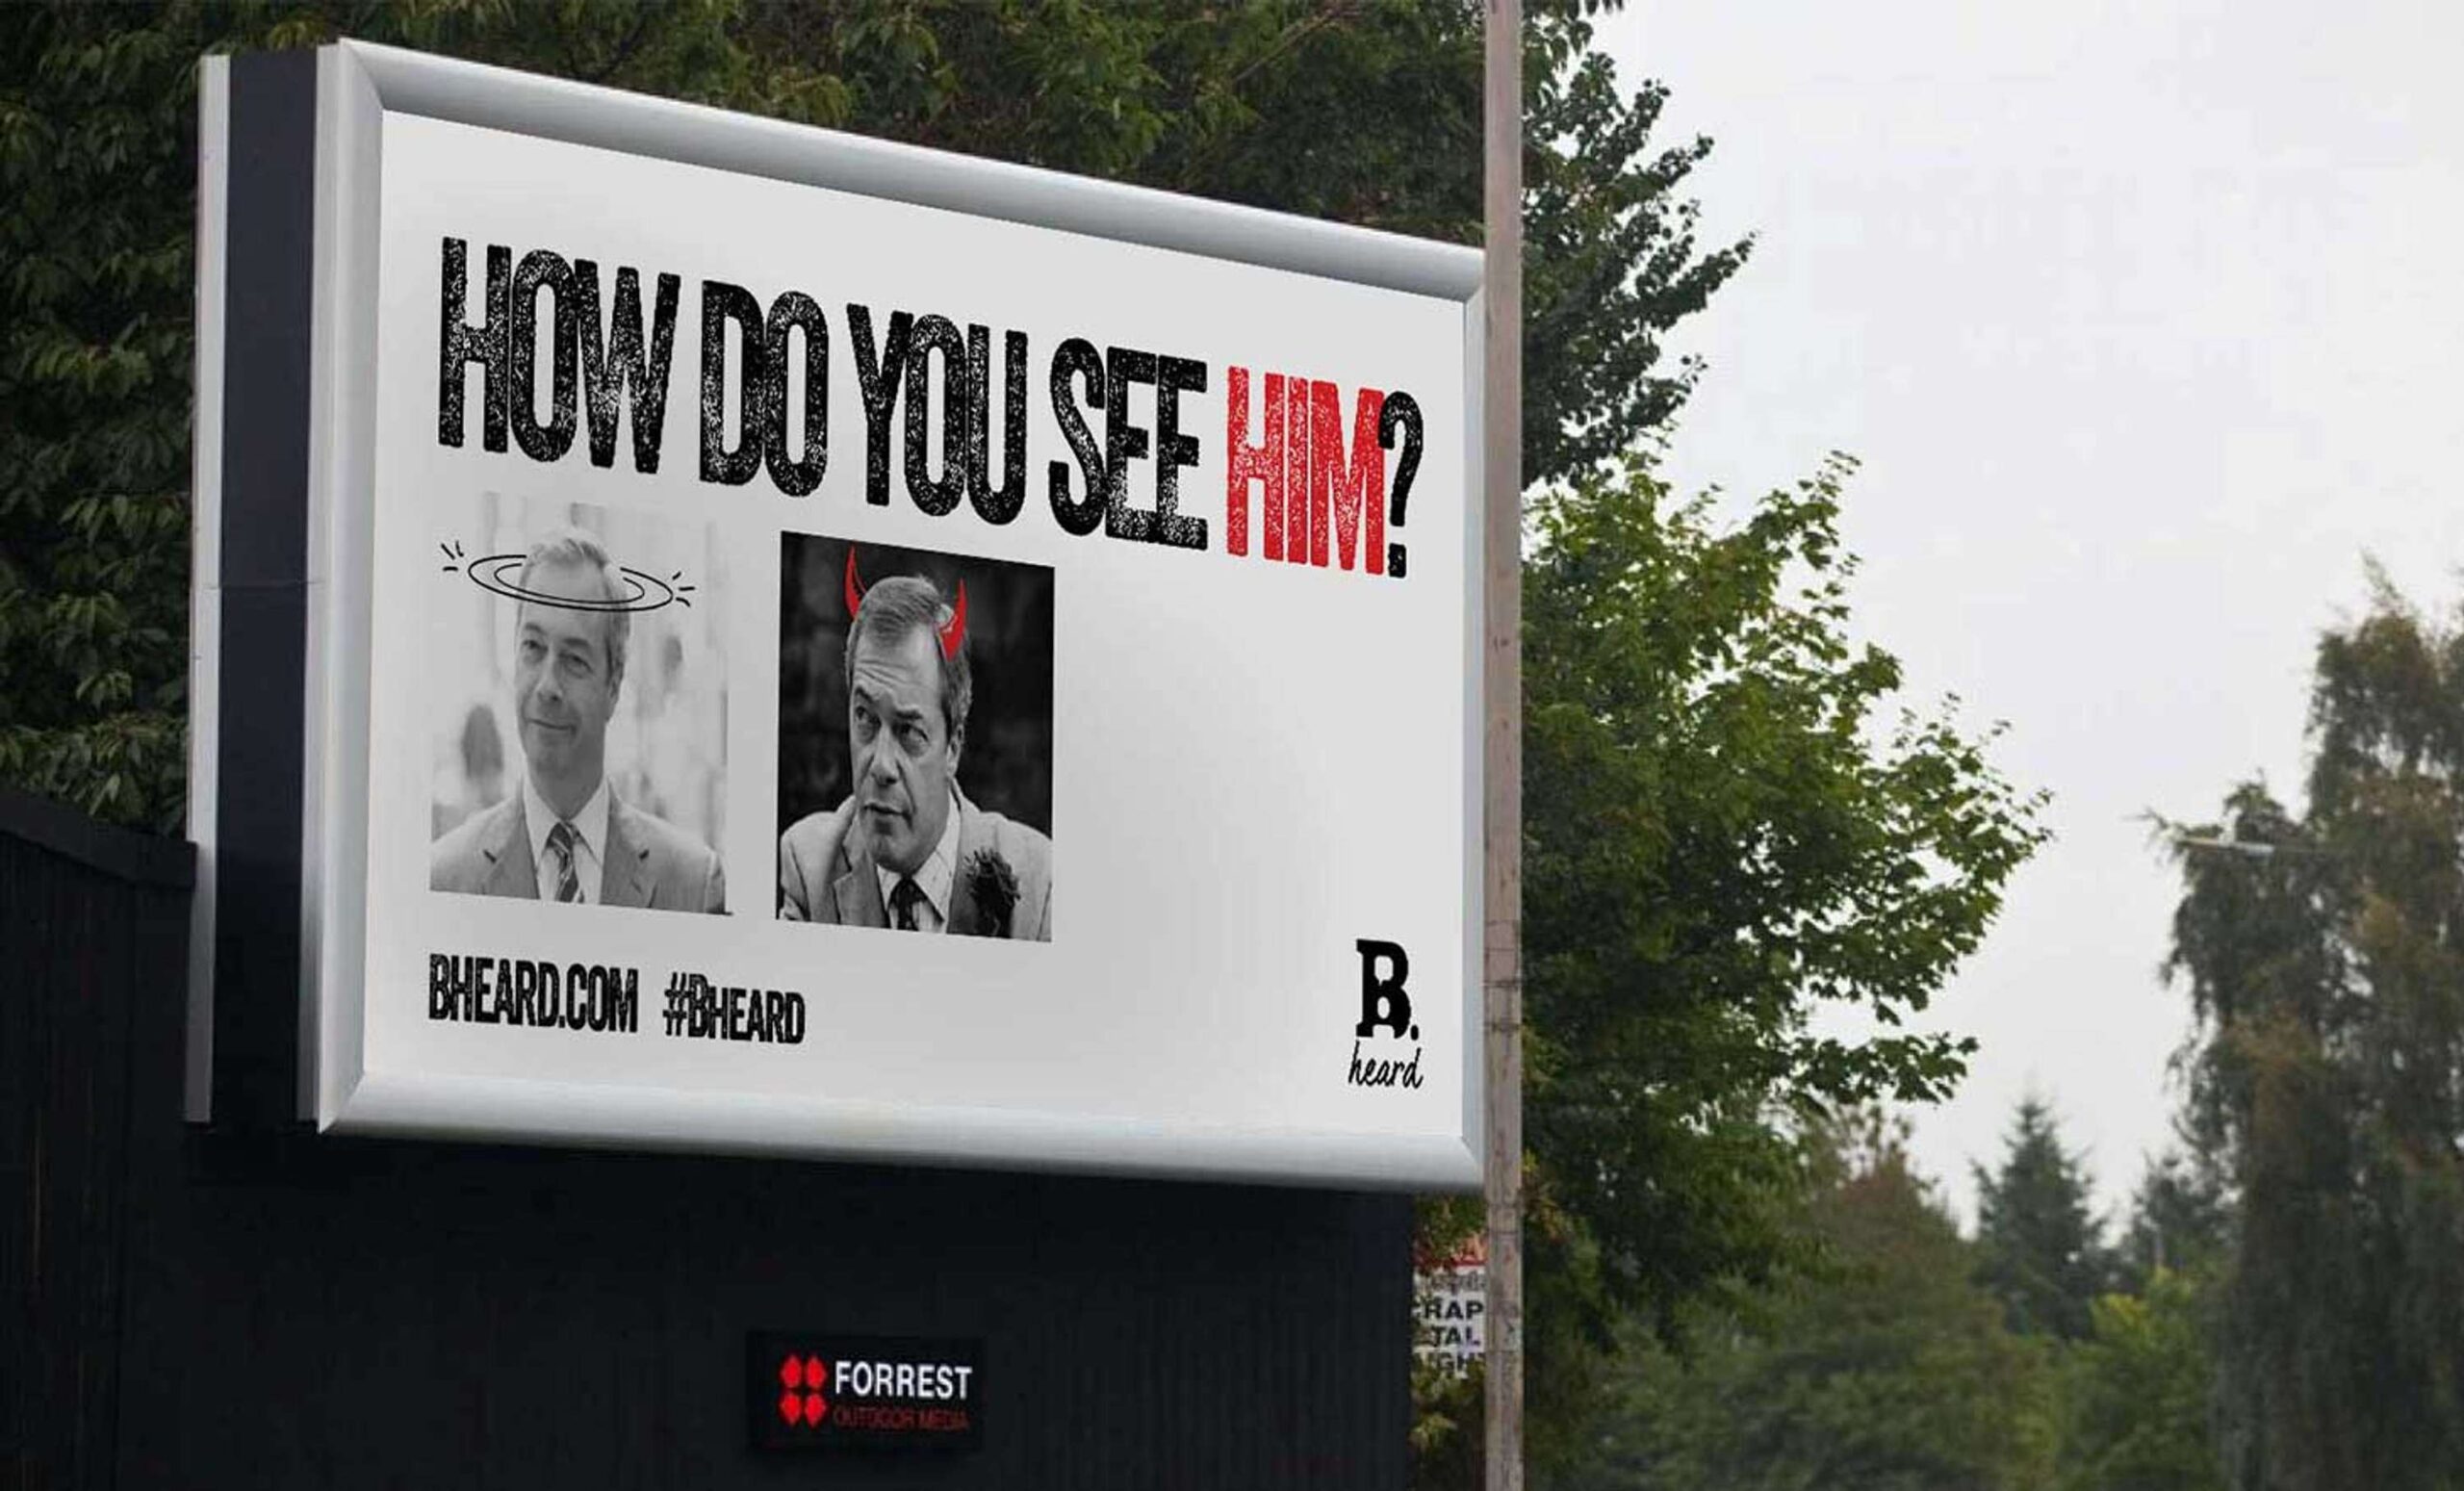 White billboard has black and red text saying how do you see him? With photos of Nigel farage illustrated with angel halo and devil horns